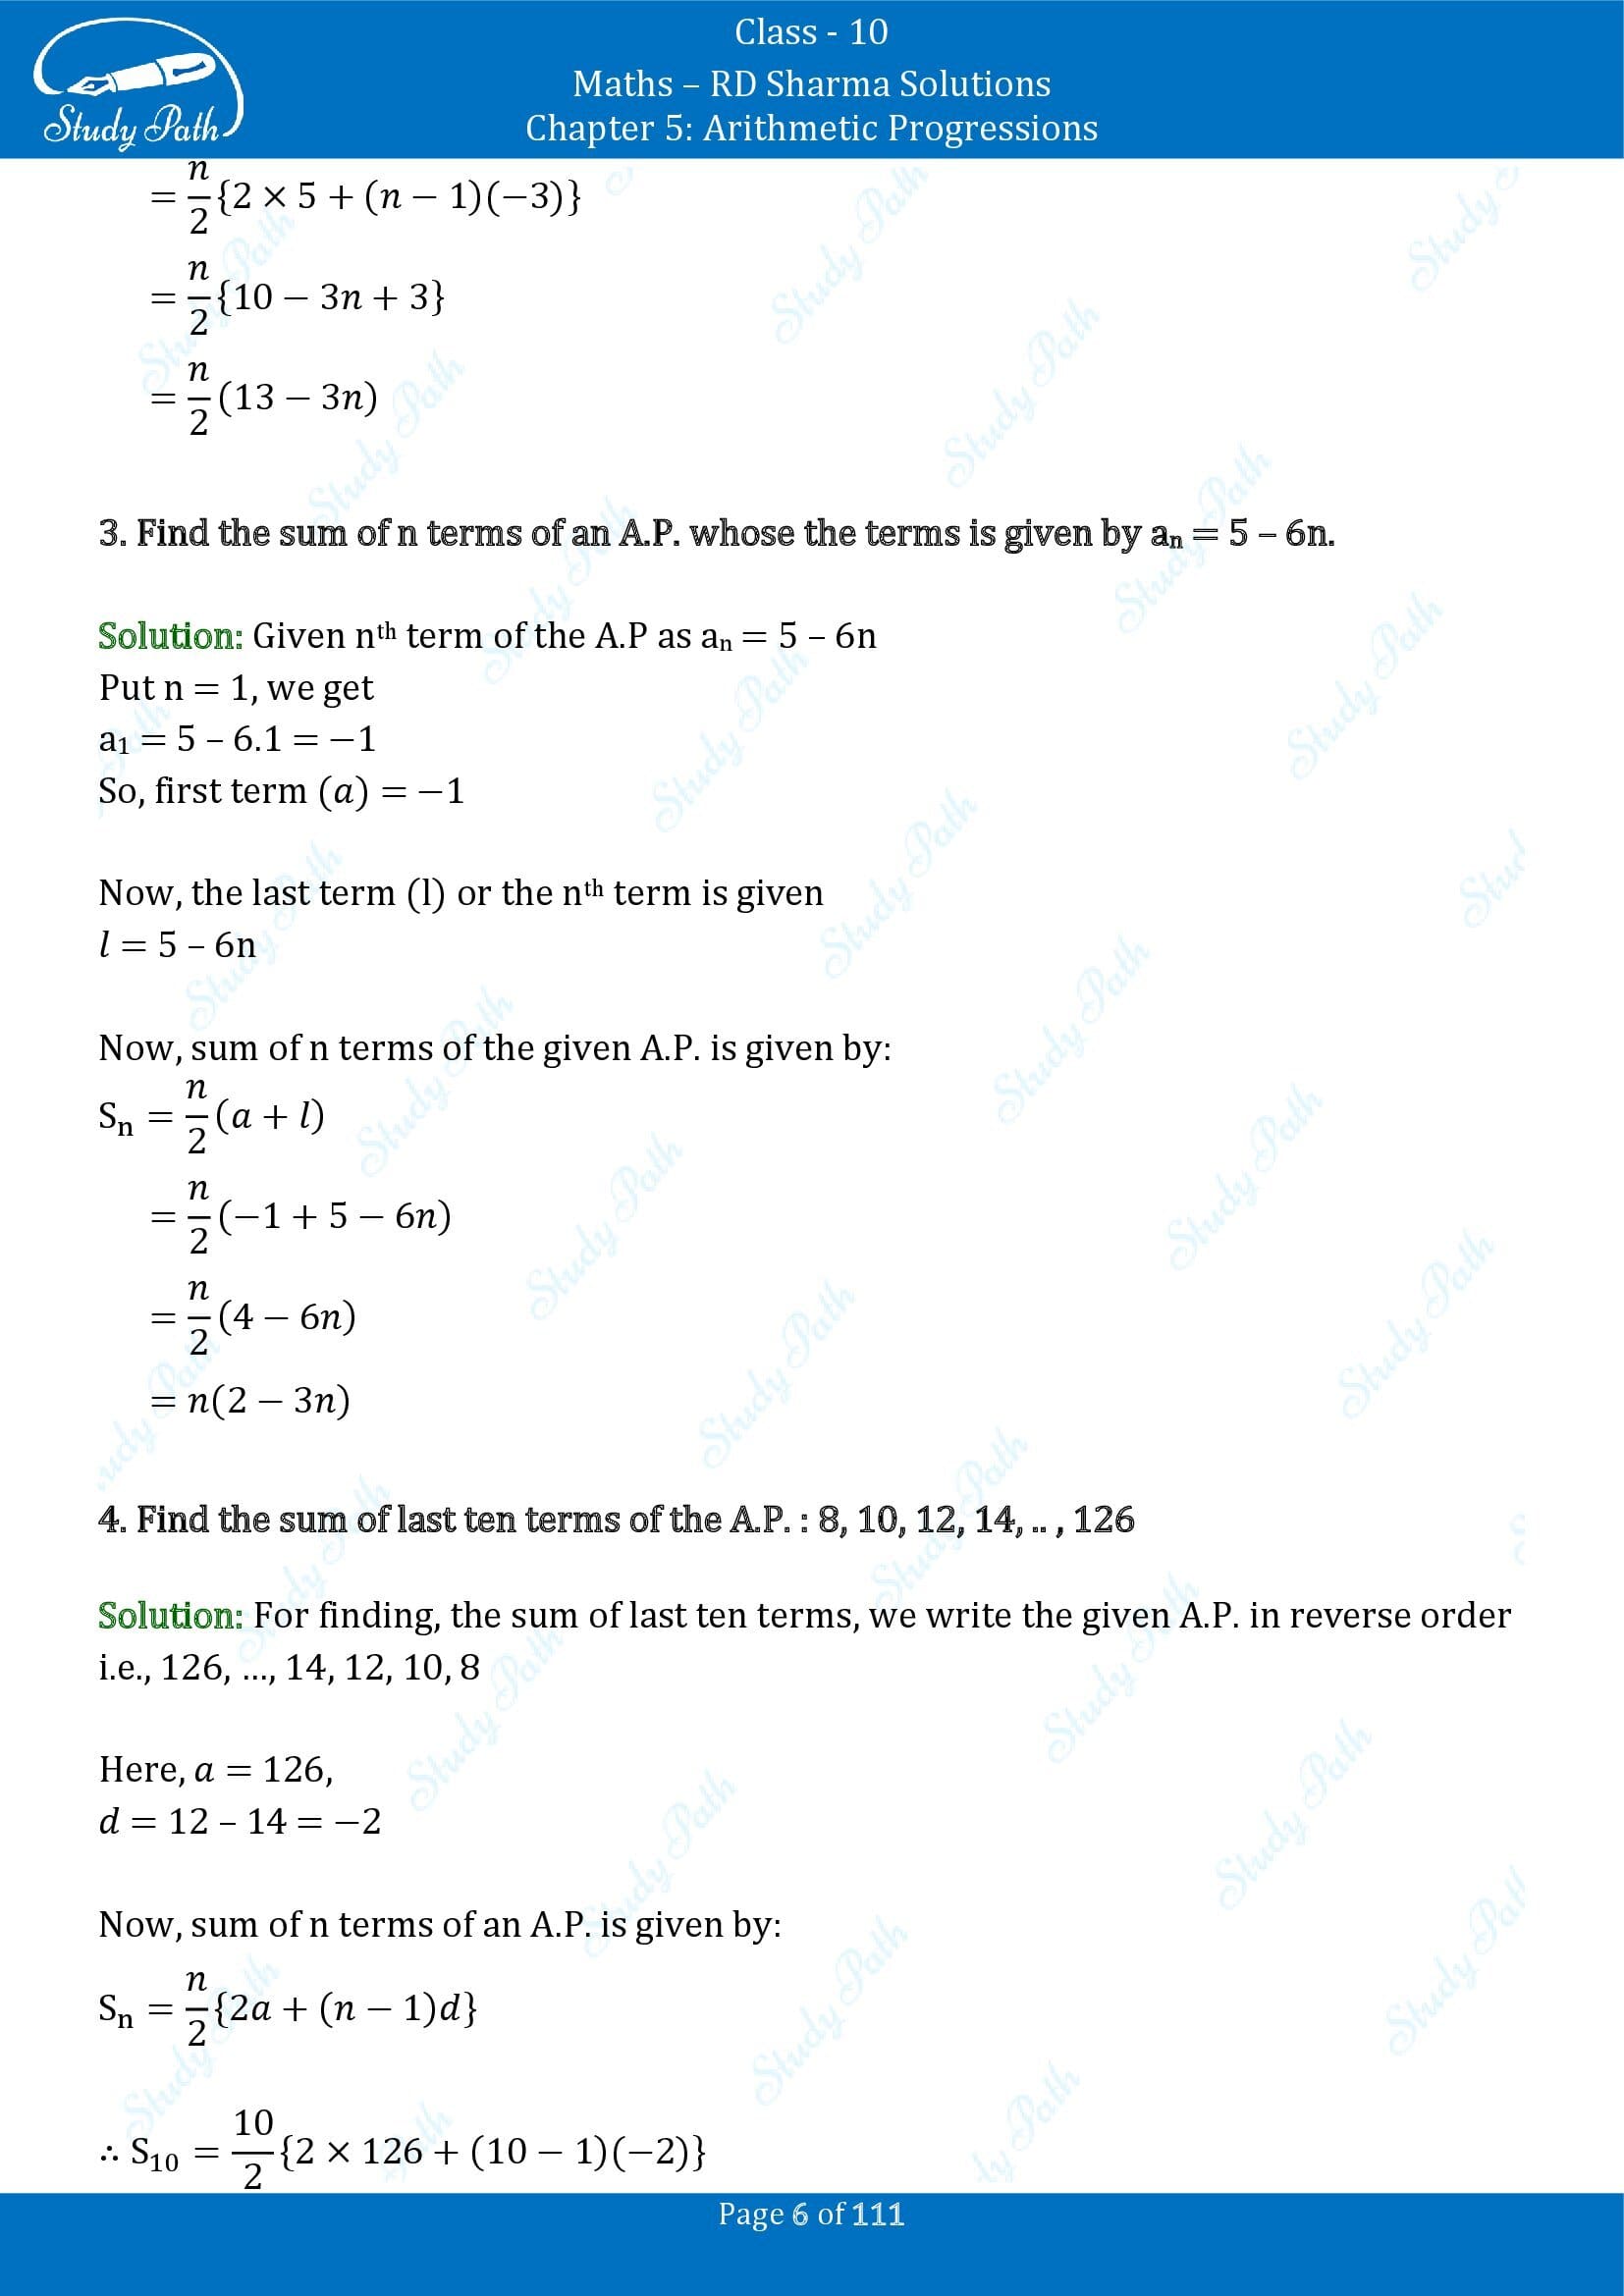 RD Sharma Solutions Class 10 Chapter 5 Arithmetic Progressions Exercise 5.6 00006